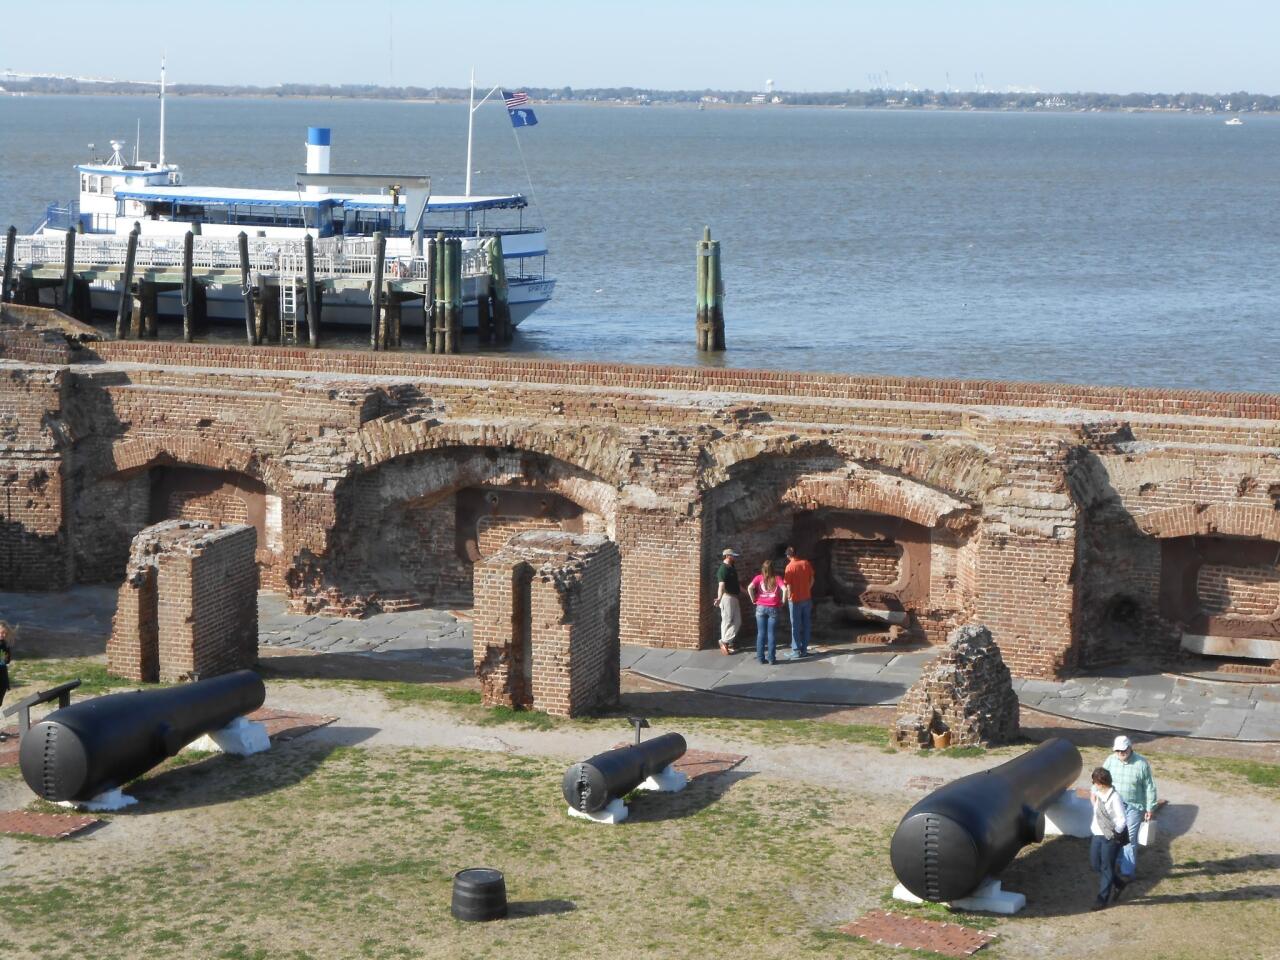 Ft. Sumter is a sea fort located in Charleston Harbor. The fort is best known as the site where the shots that started the American Civil War were fired, at the Battle of Ft. Sumter on April 12, 1861.